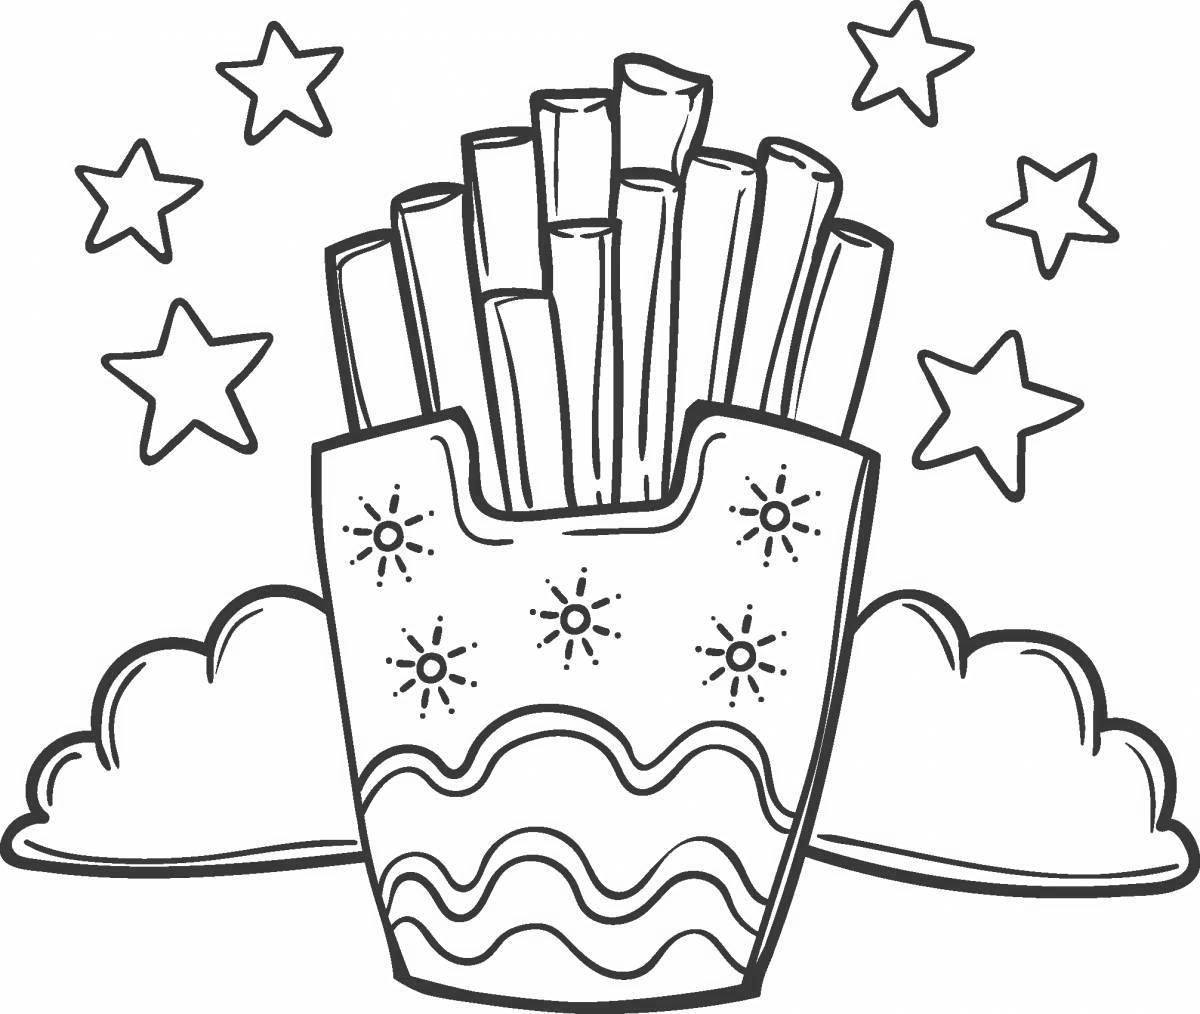 Coloring book with smoked french fries